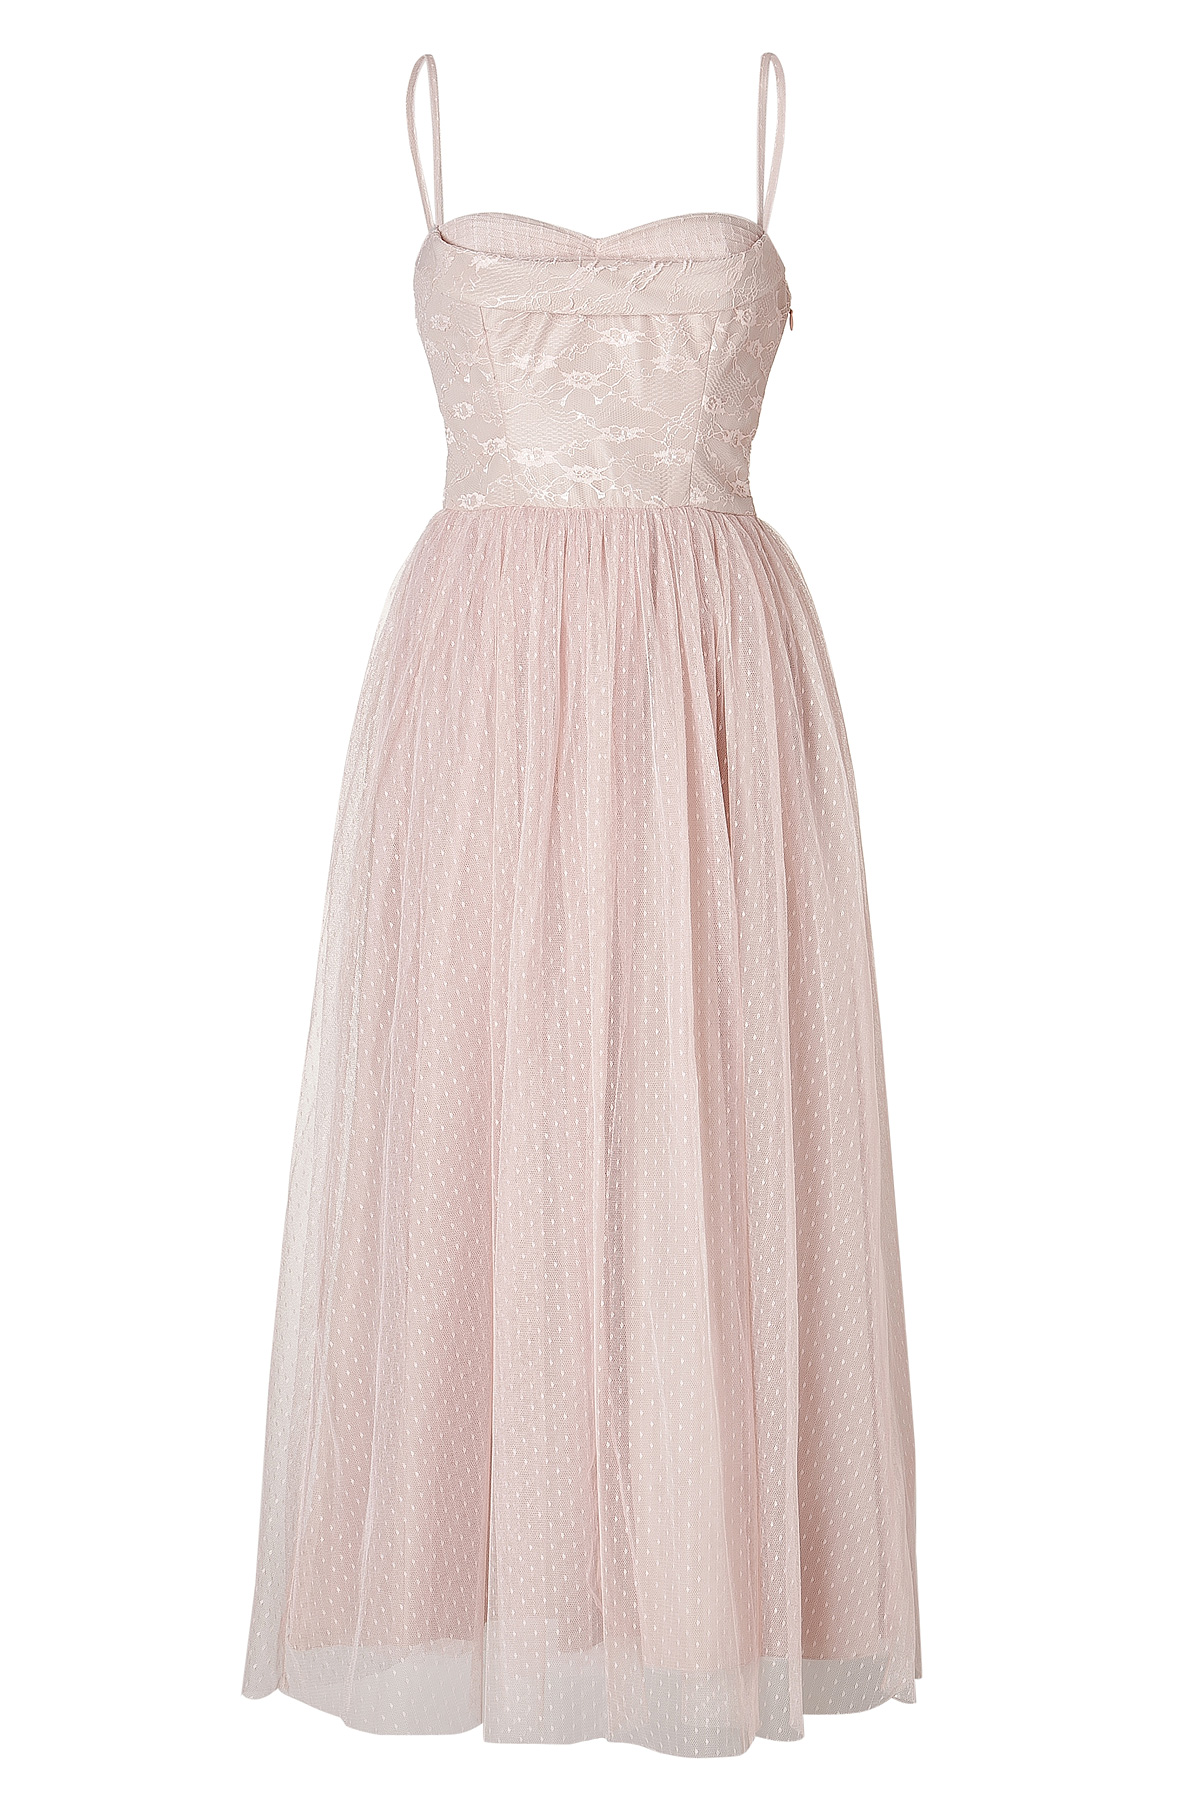 RED Valentino Lace Tulle Evening Gown in Brown - Lyst